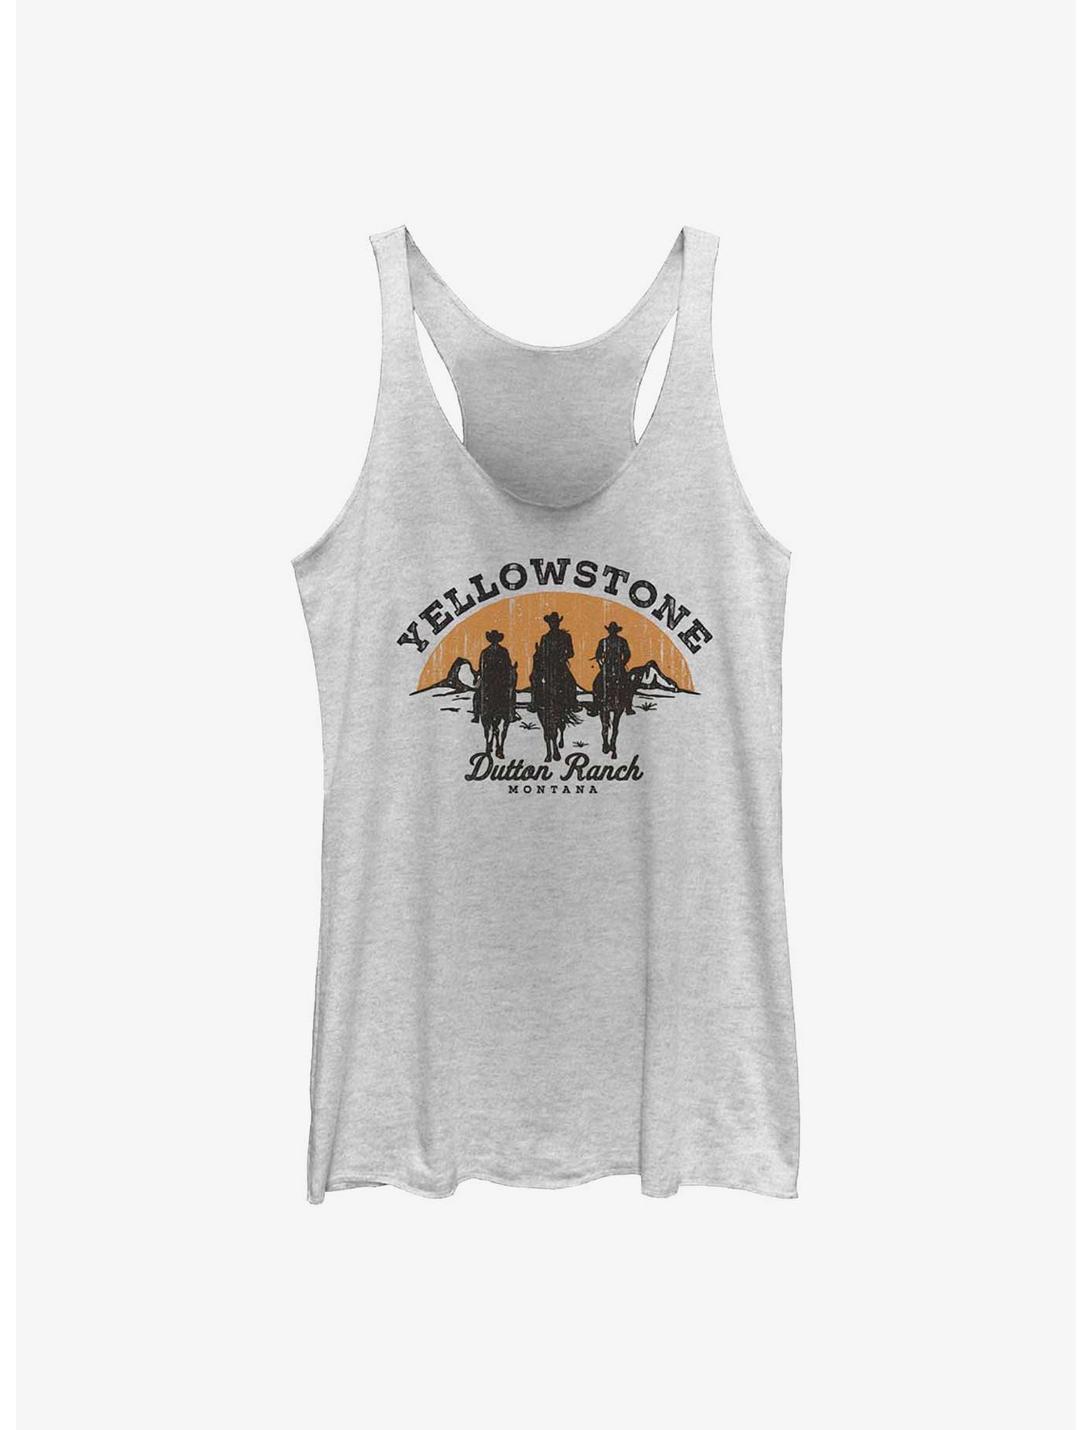 Yellowstone Sunset Ride Womens Tank Top, WHITE HTR, hi-res